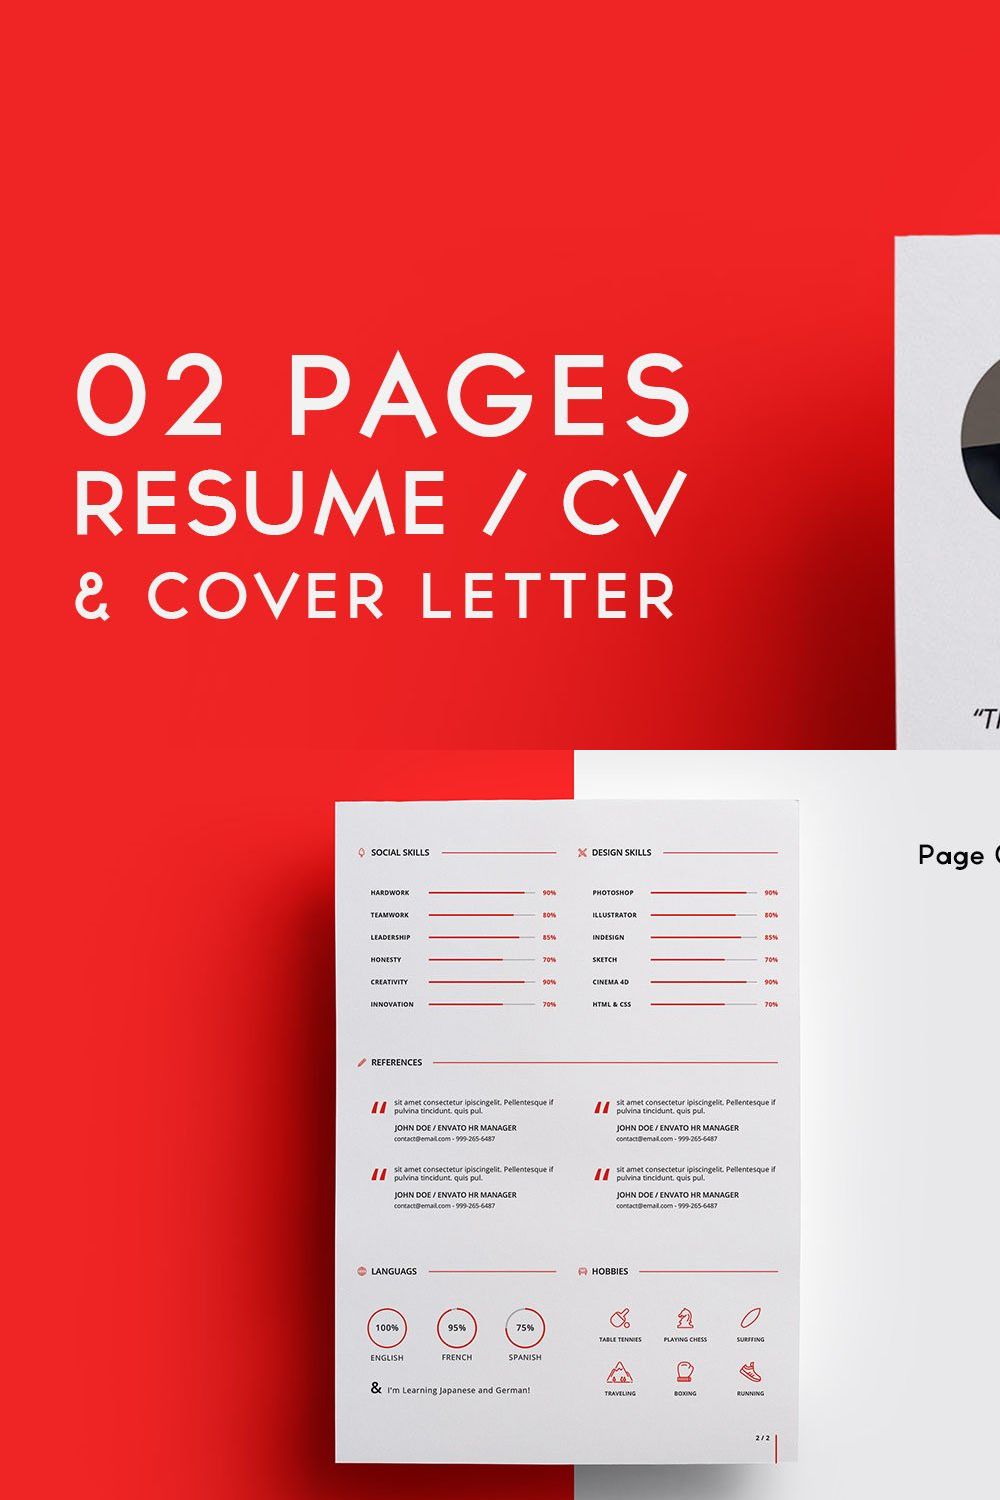 02 Pages Resume / CV pinterest preview image.